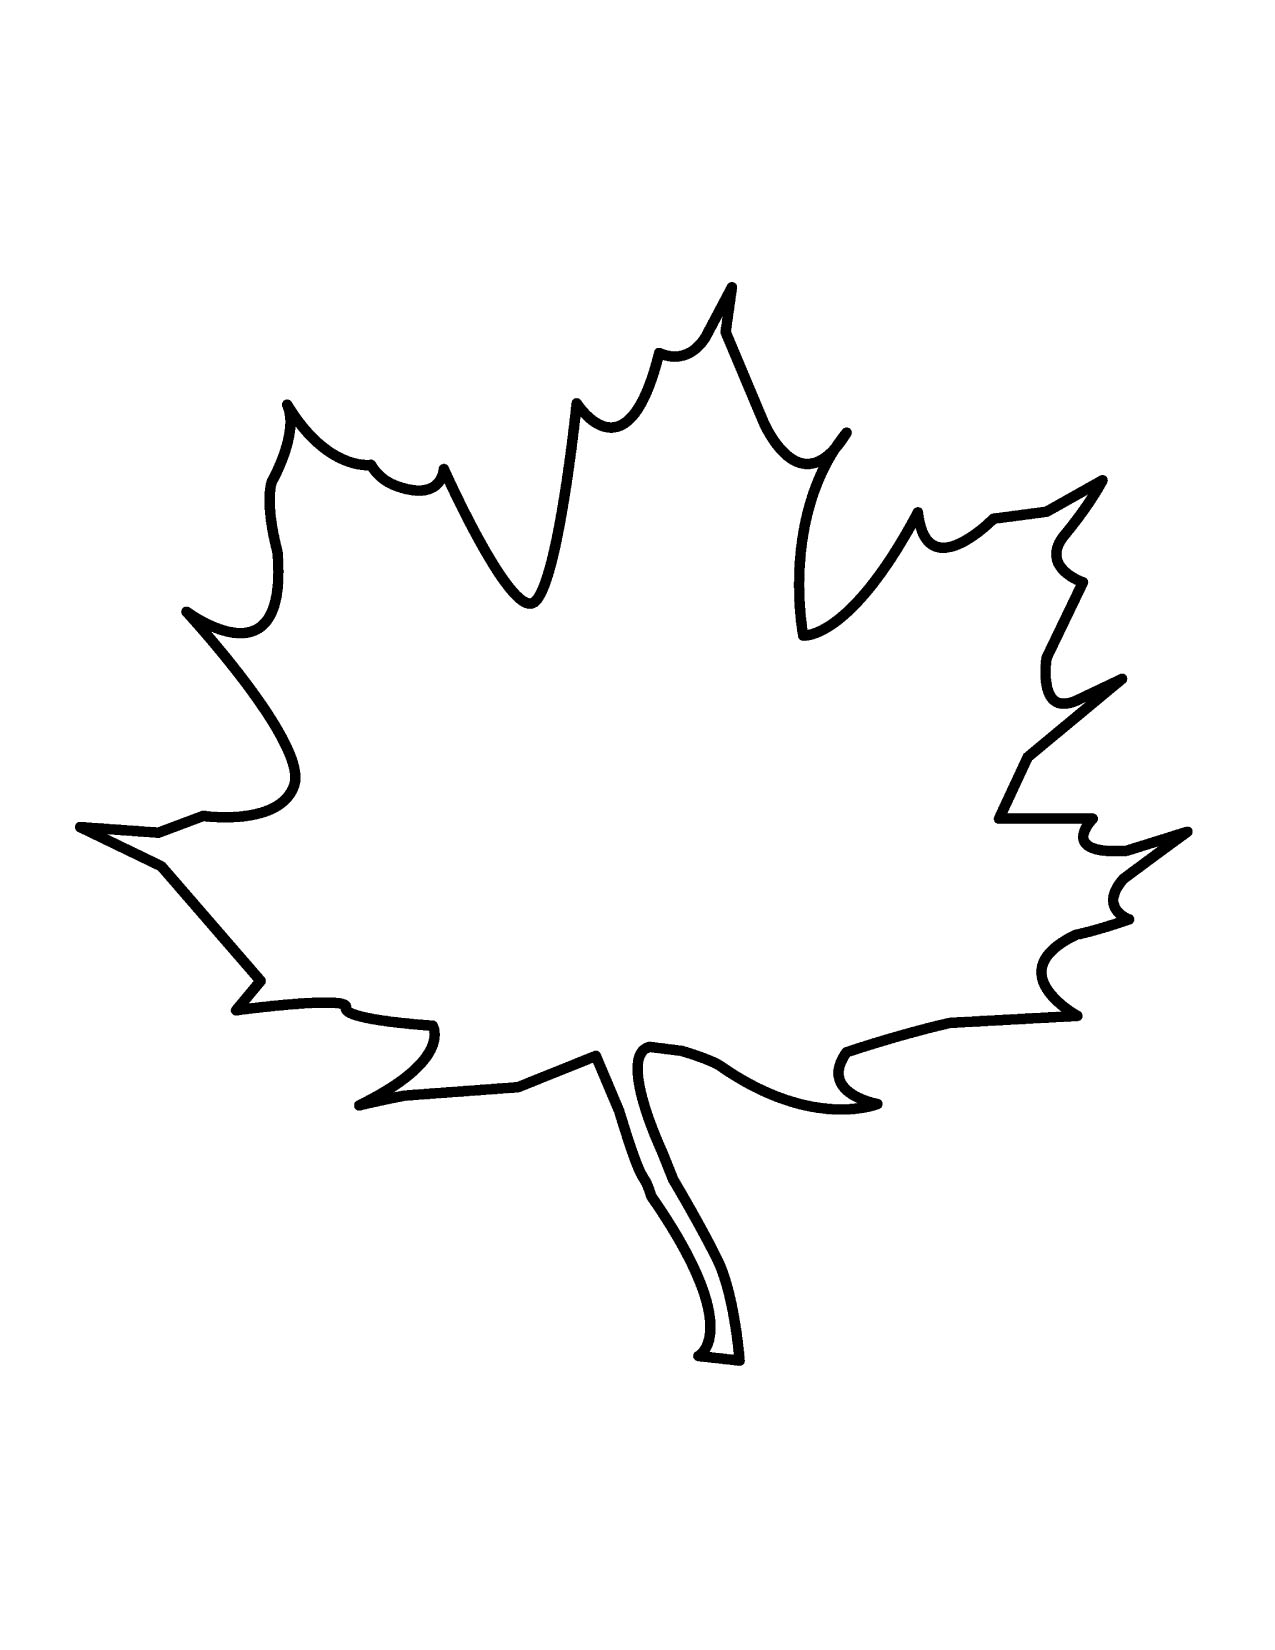 Leaf outline tree outline with leaves clipart 4